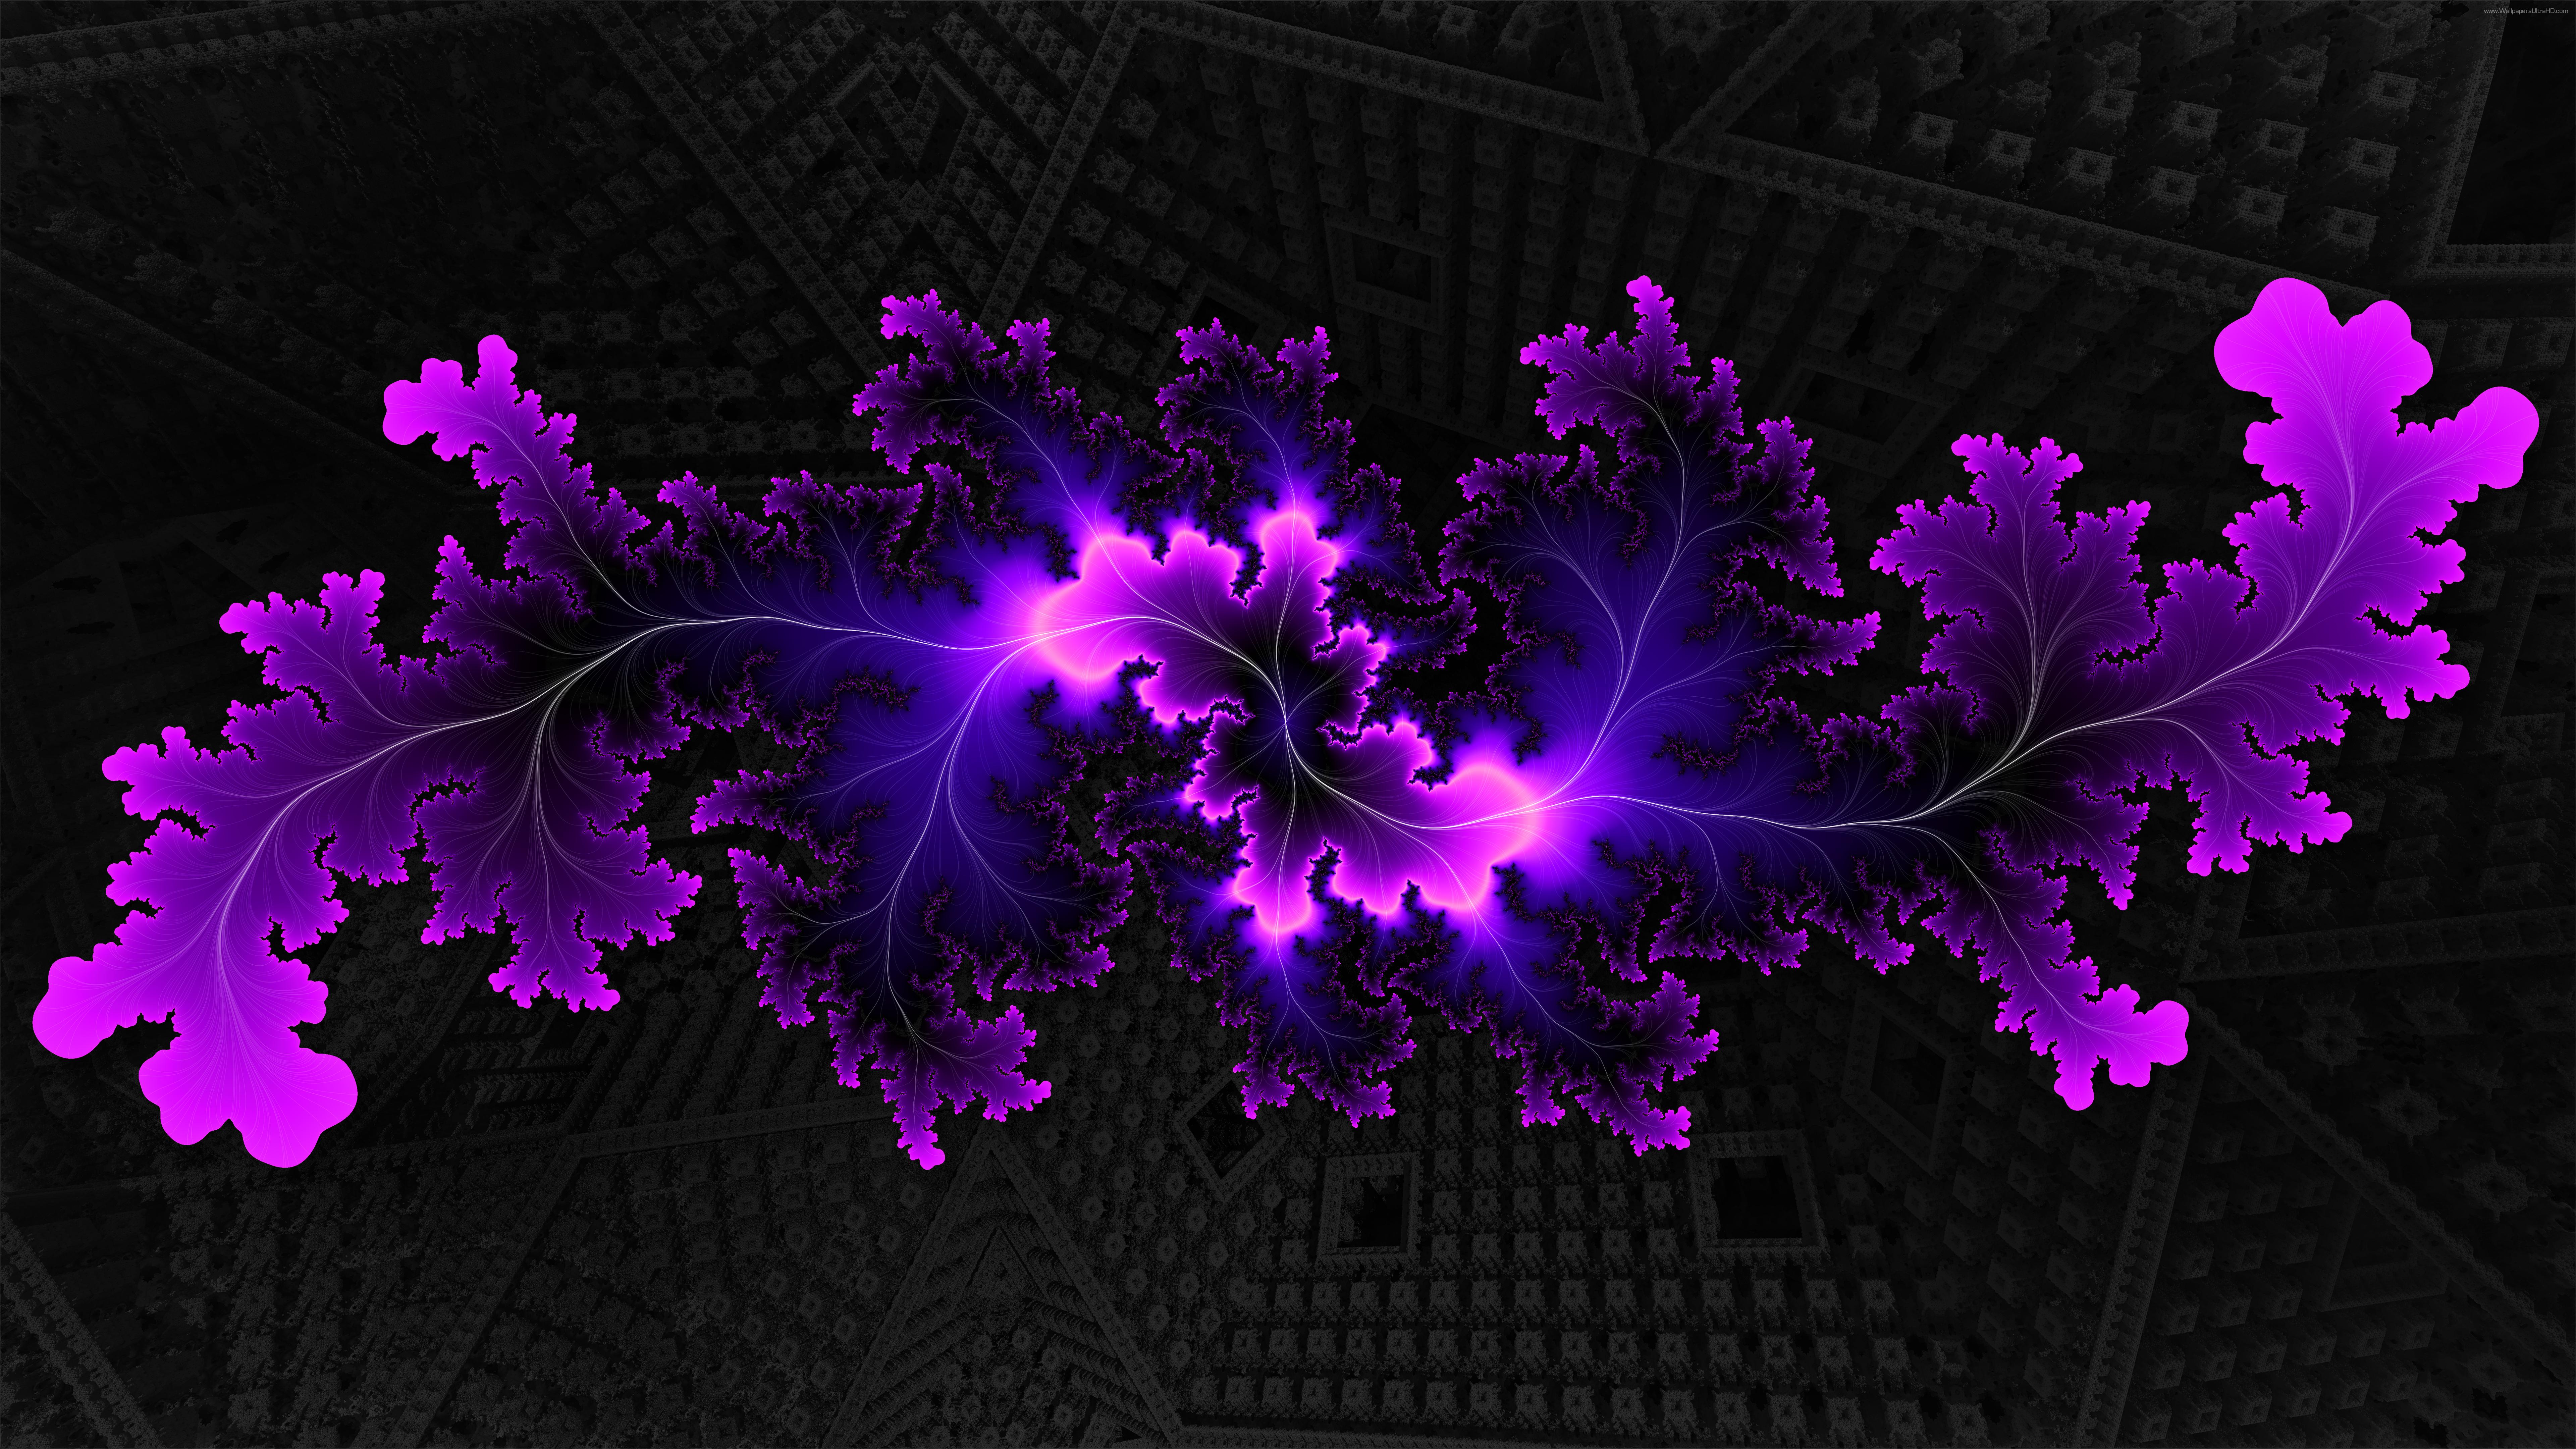 Purple Flower Petals on Black and White Textile. Wallpaper in 7680x4320 Resolution